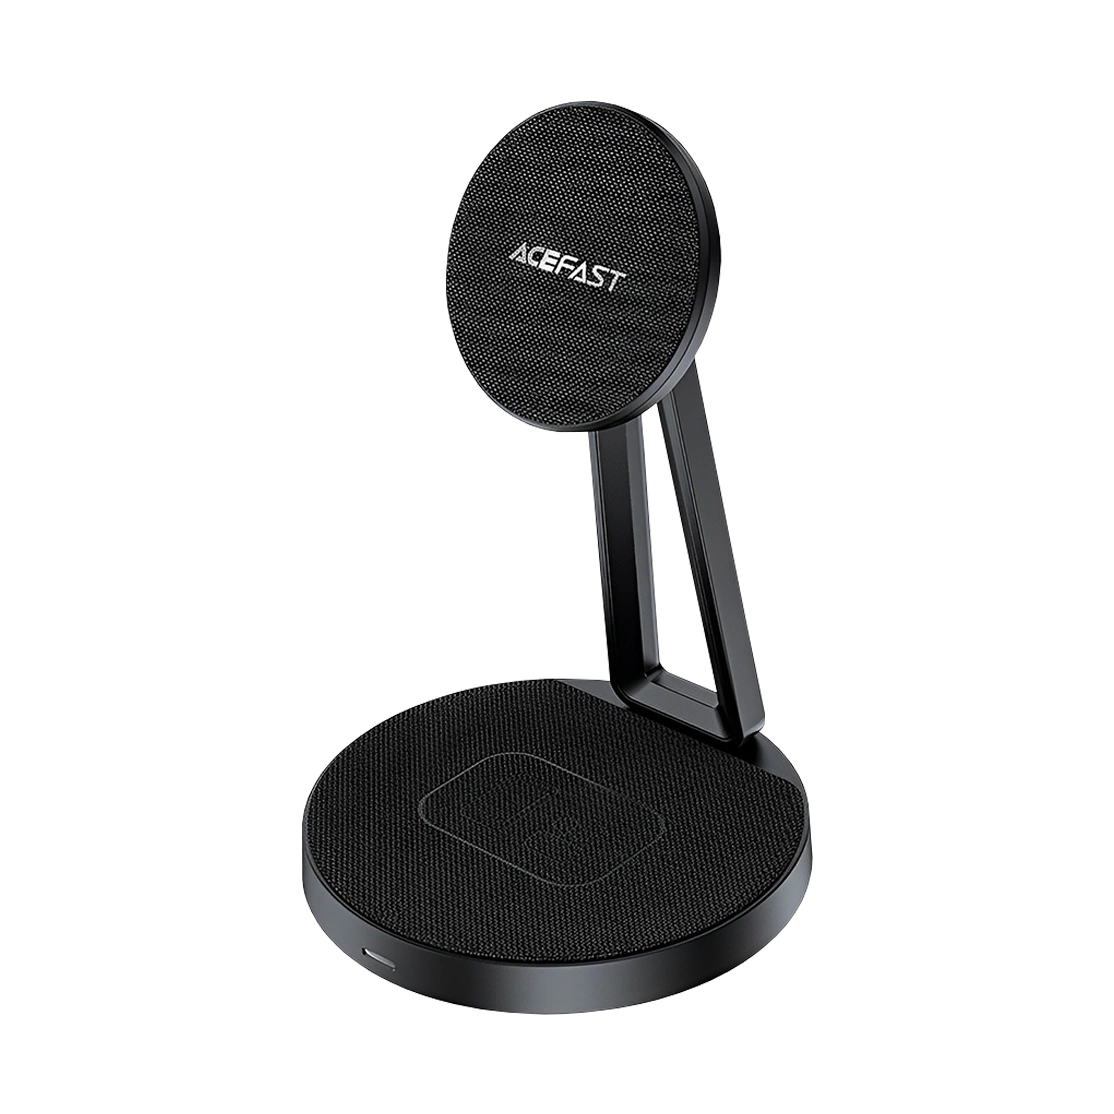 AceFast Desktop Holder Wireless Fast Charger 2 in 1 E8